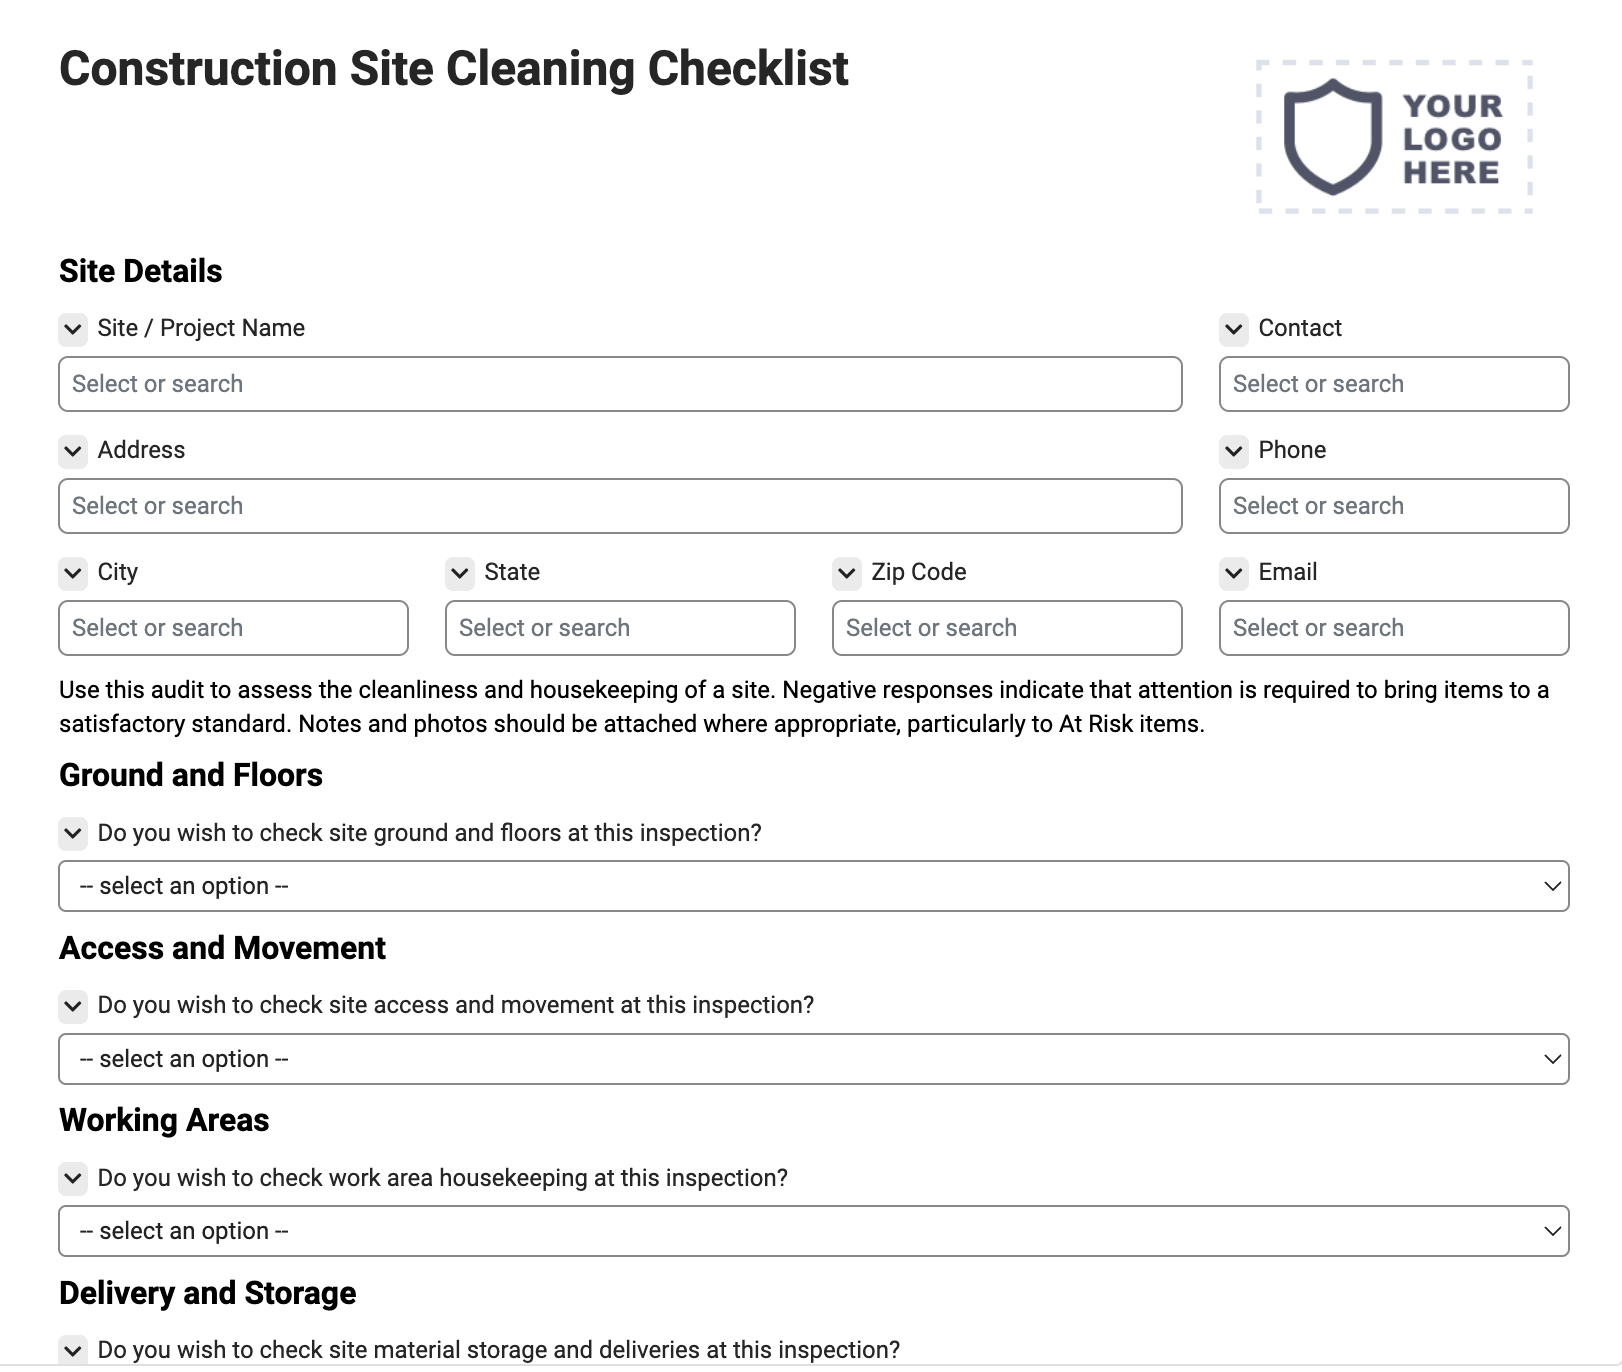 Construction Site Cleaning Checklist